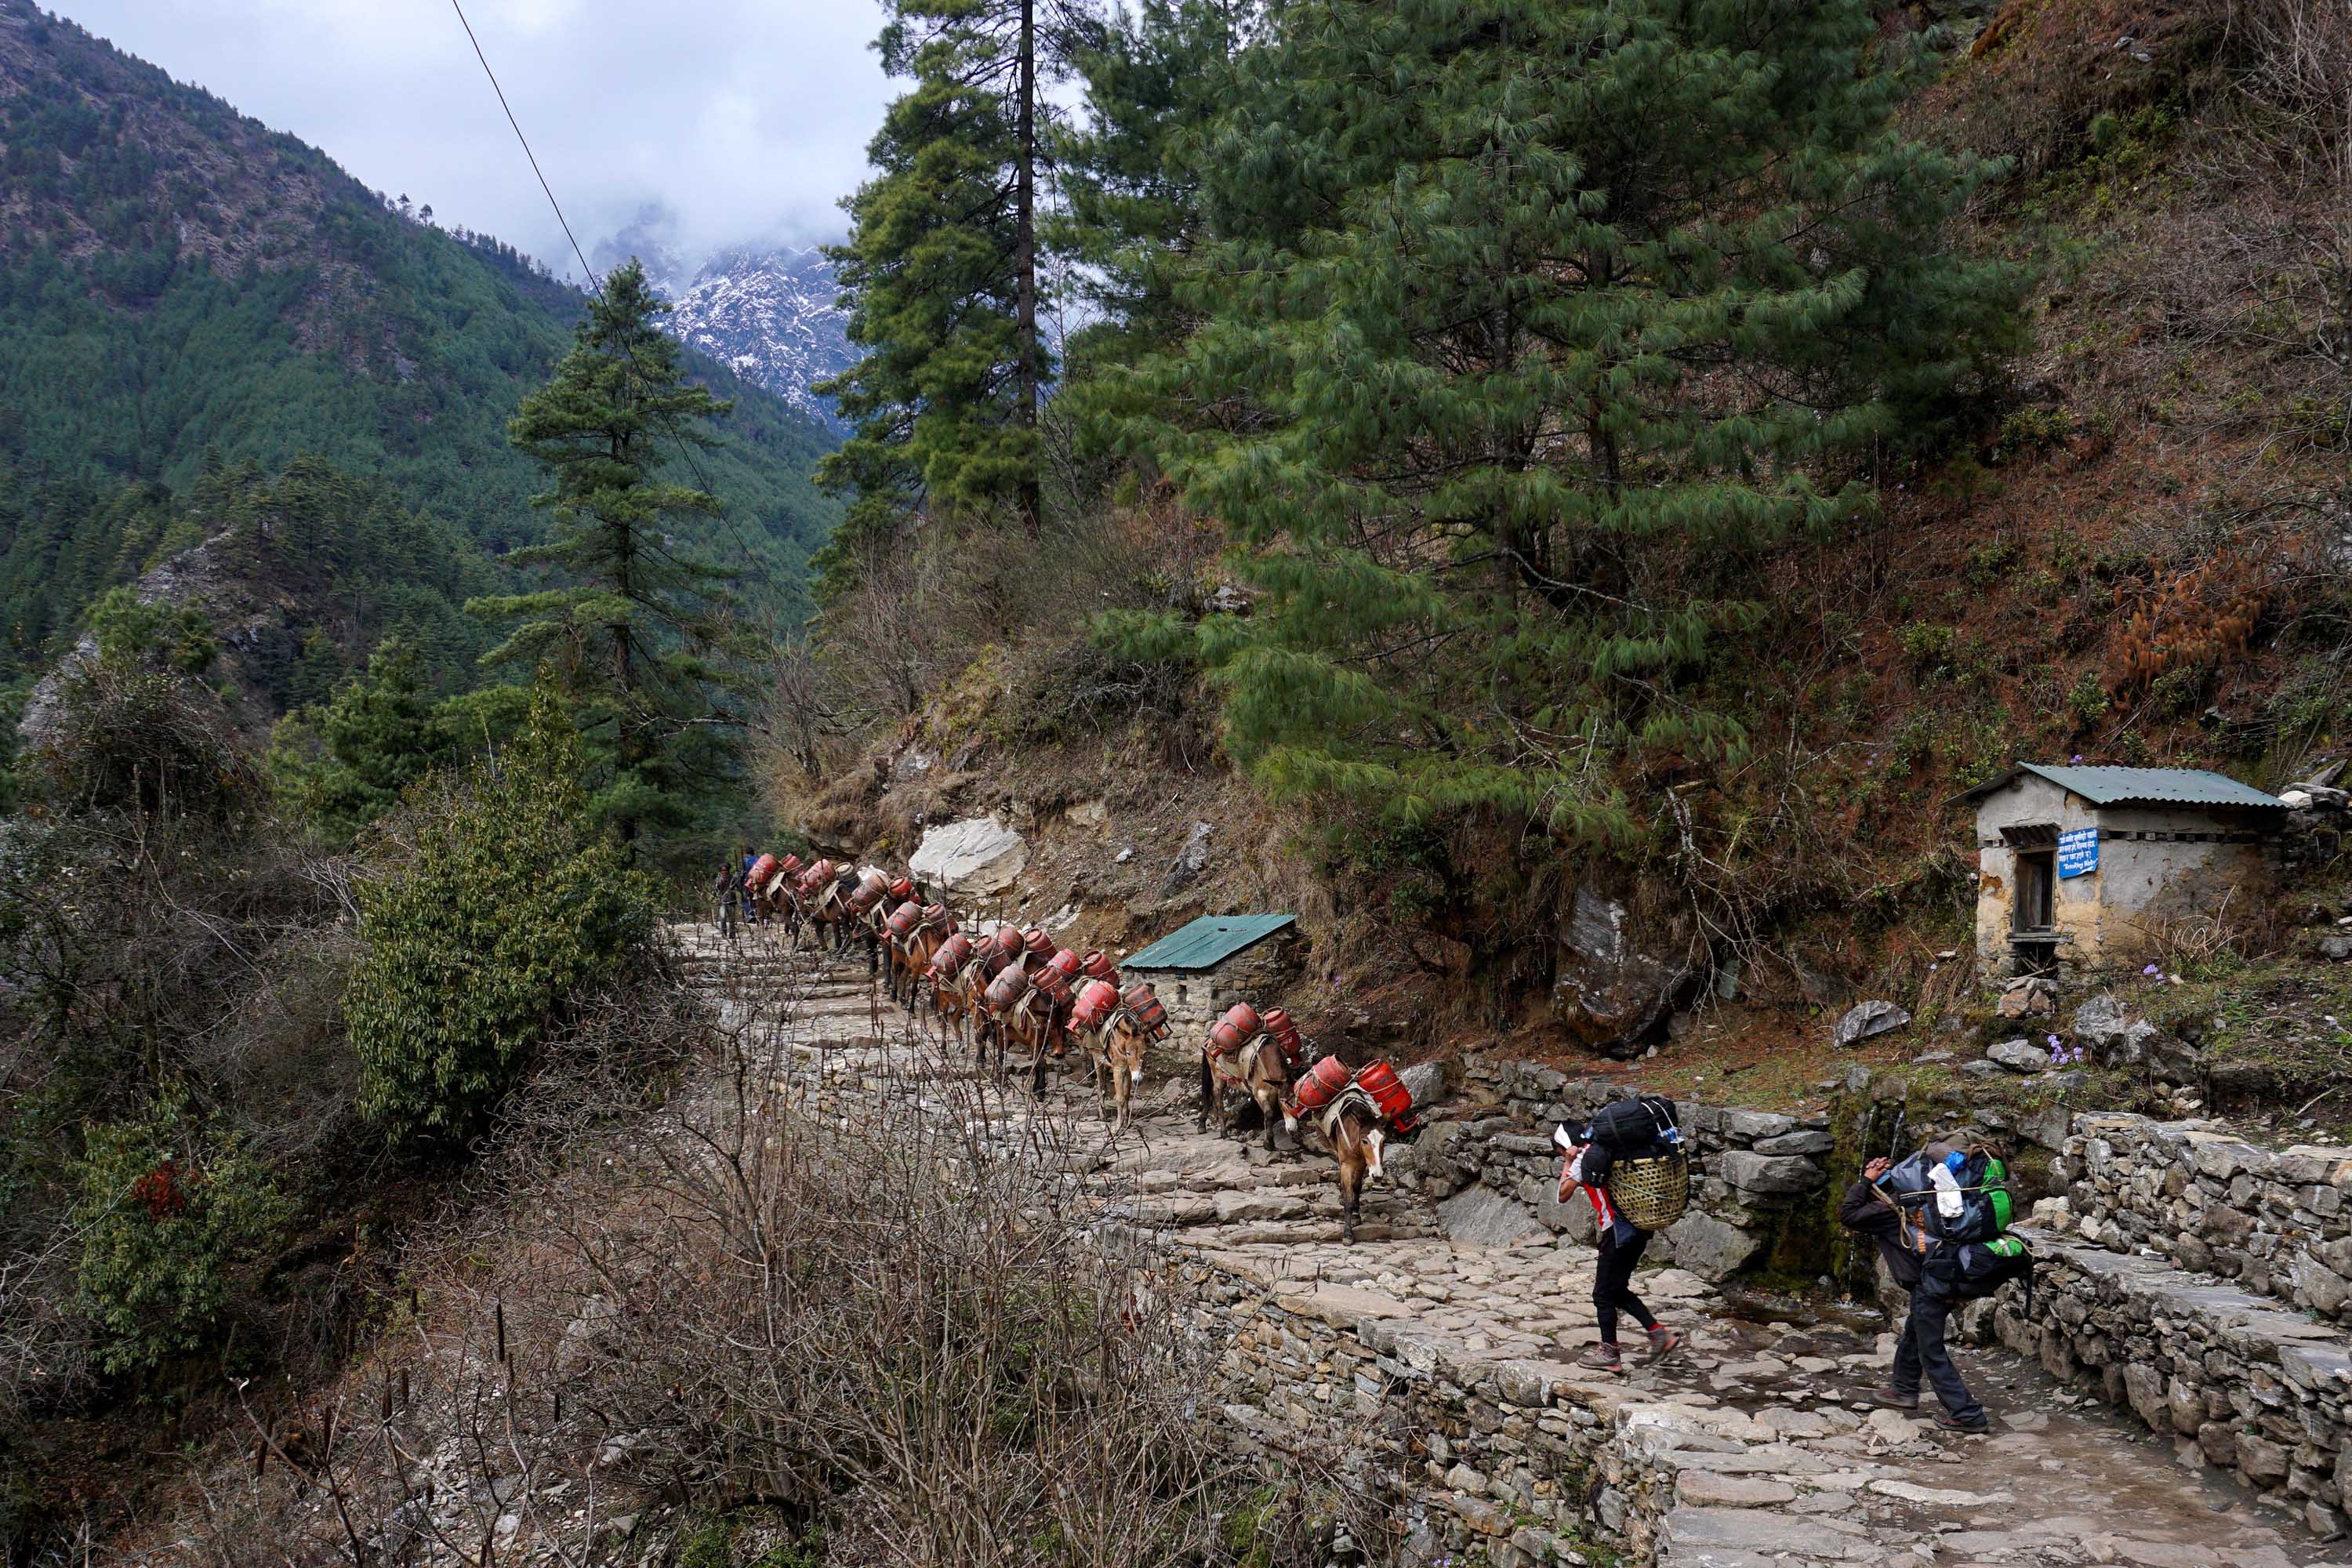 Porters walk past mules carrying empty gas cylinders along a path in Phakding, Nepal, on March 23, after mountain expeditions and trekking were suspended due to the coronavirus outbreak.